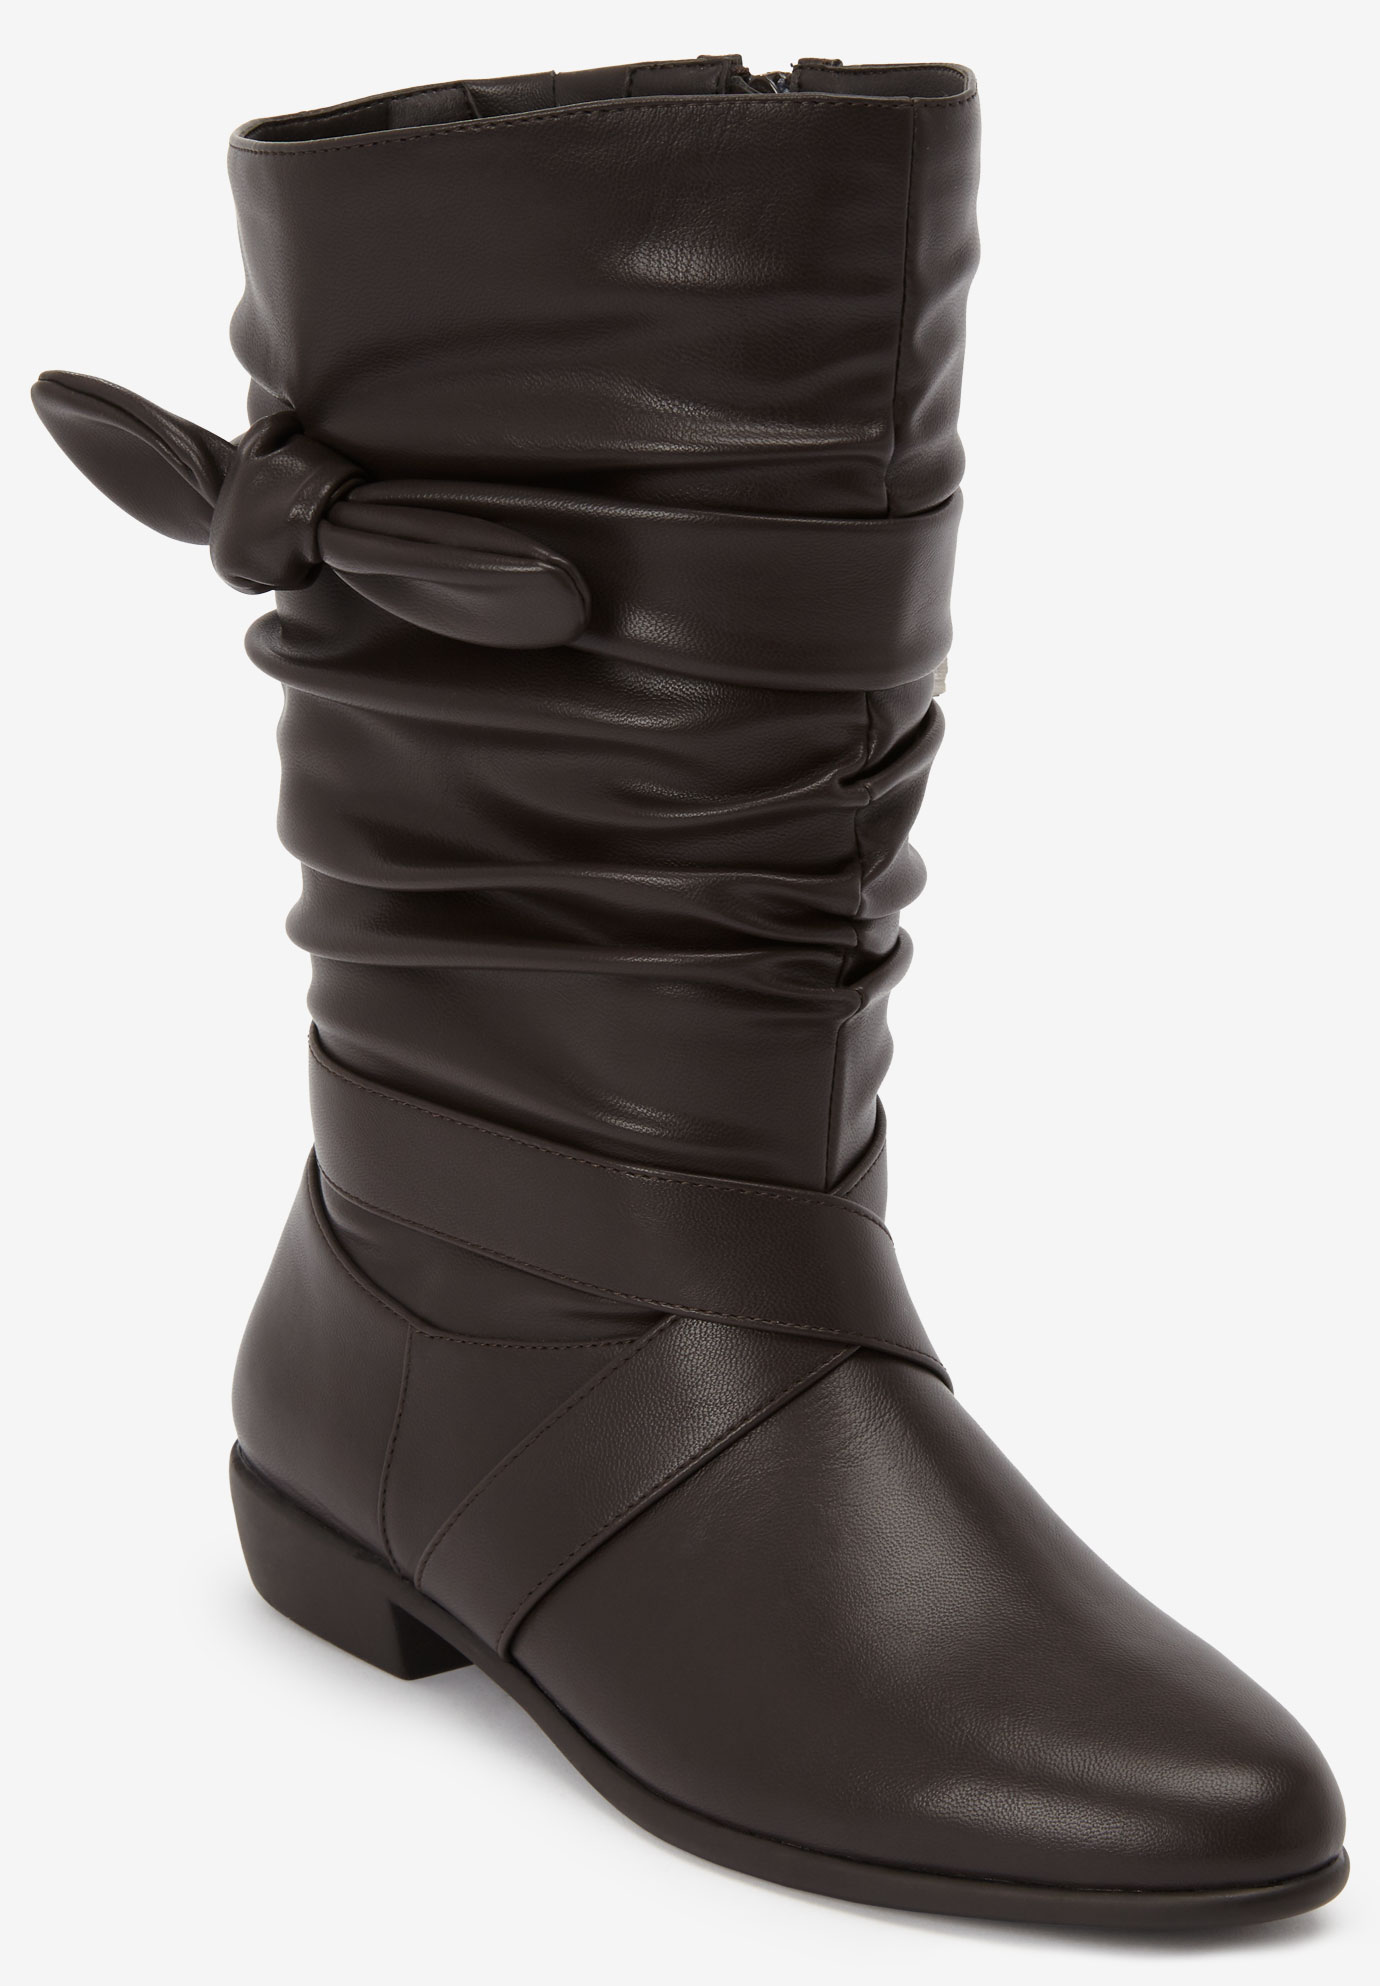 women's wide calf boots leather